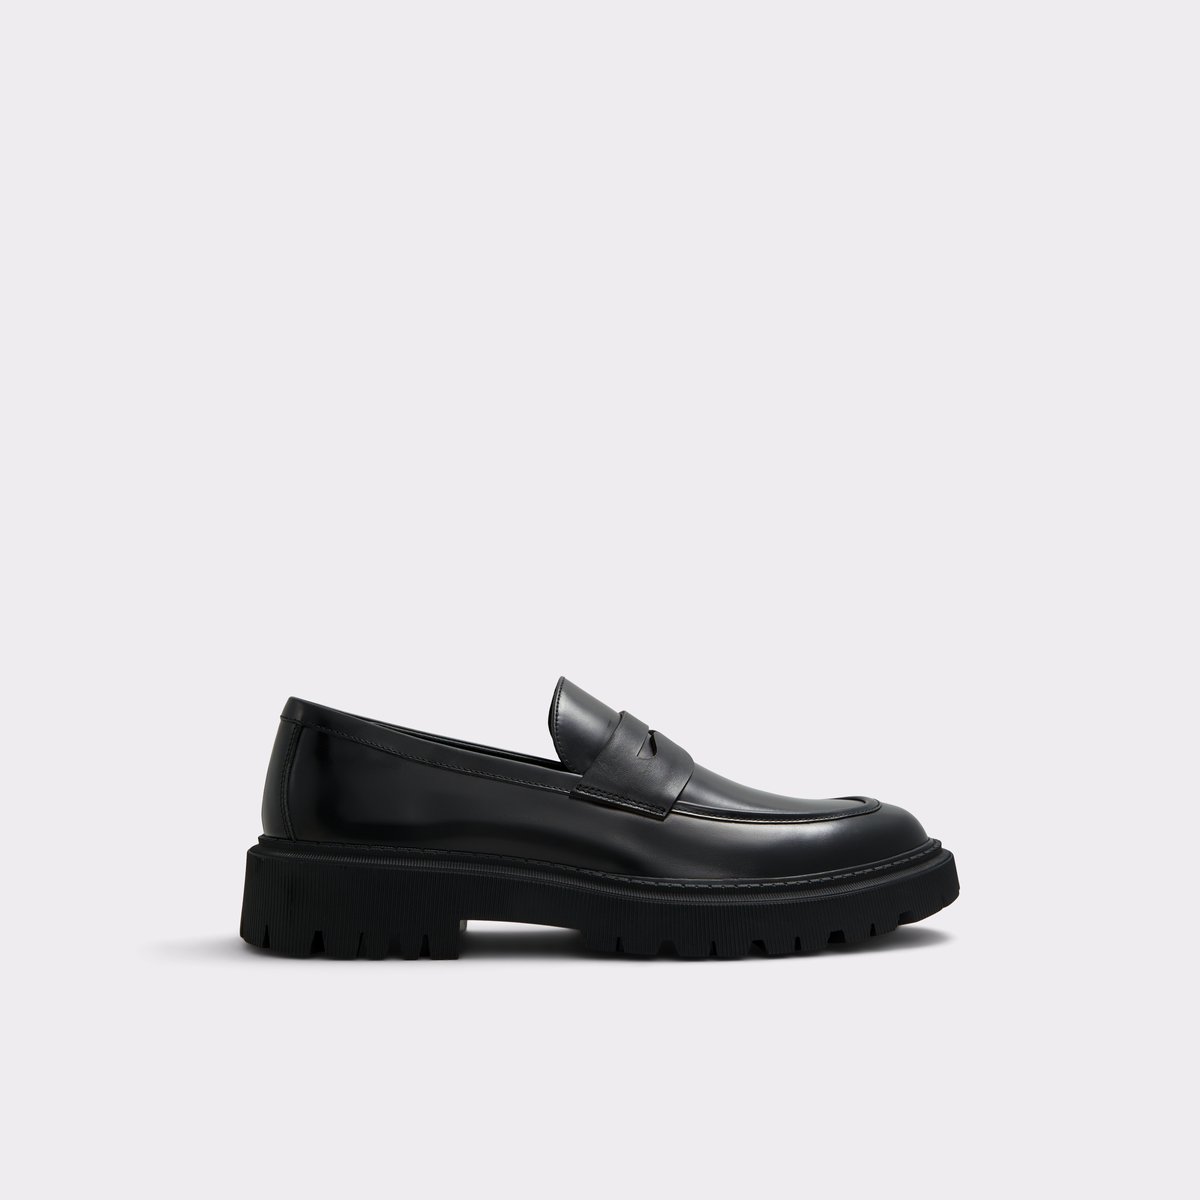 Exeter Black Leather Shiny Men's Loafers & Slip-Ons | ALDO Canada